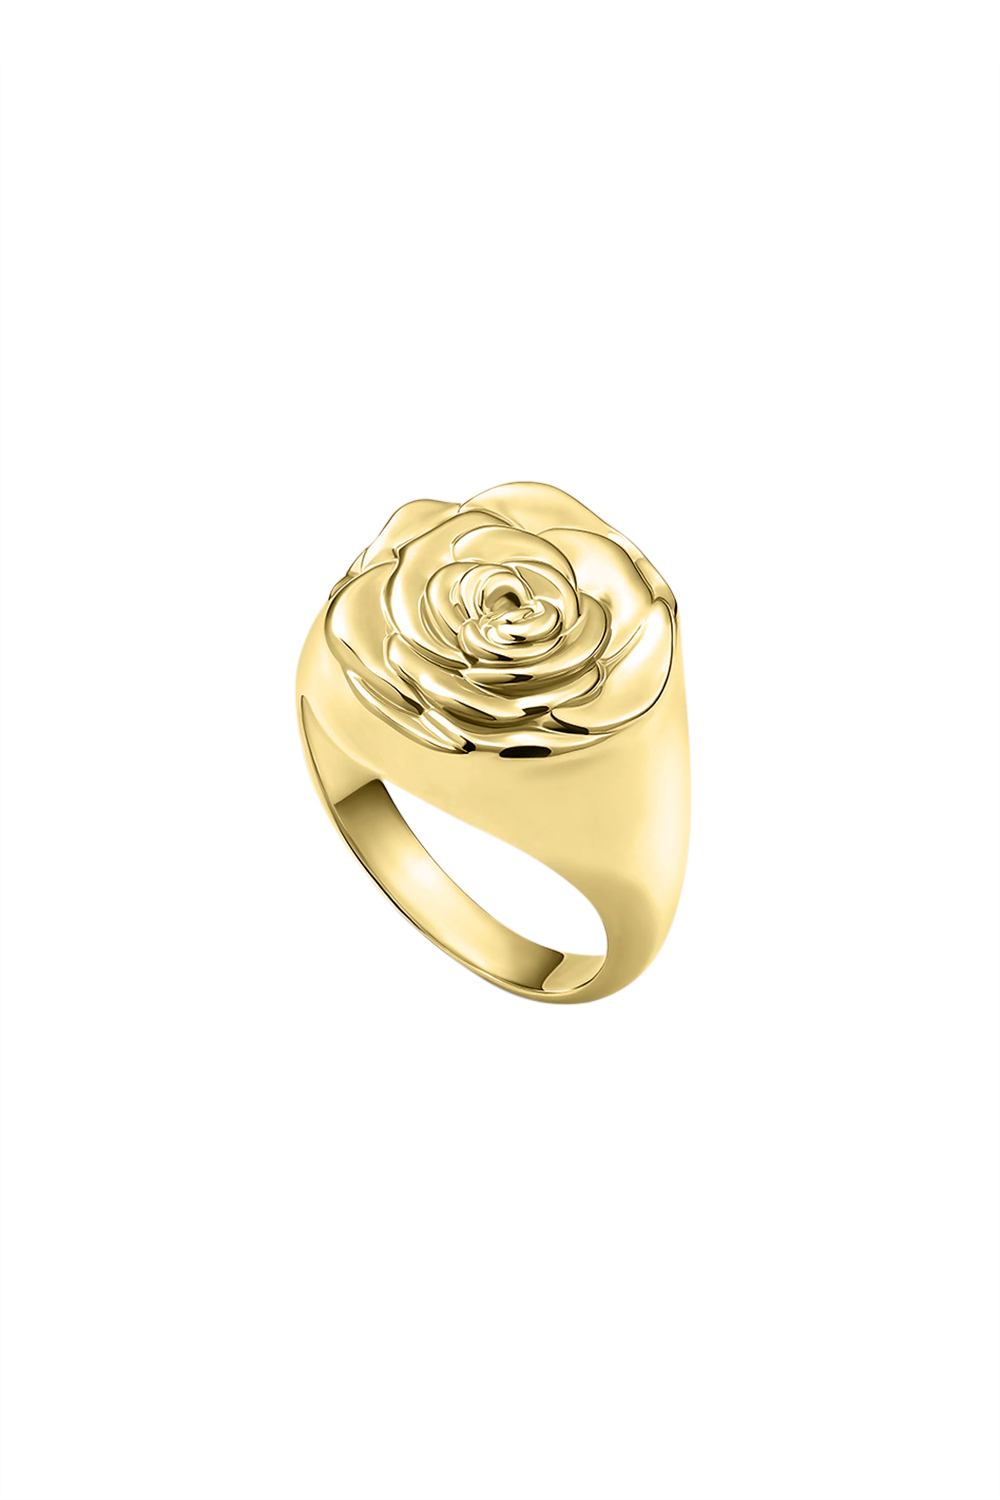 ROSE SIGNET YELLOW GOLD PLATED